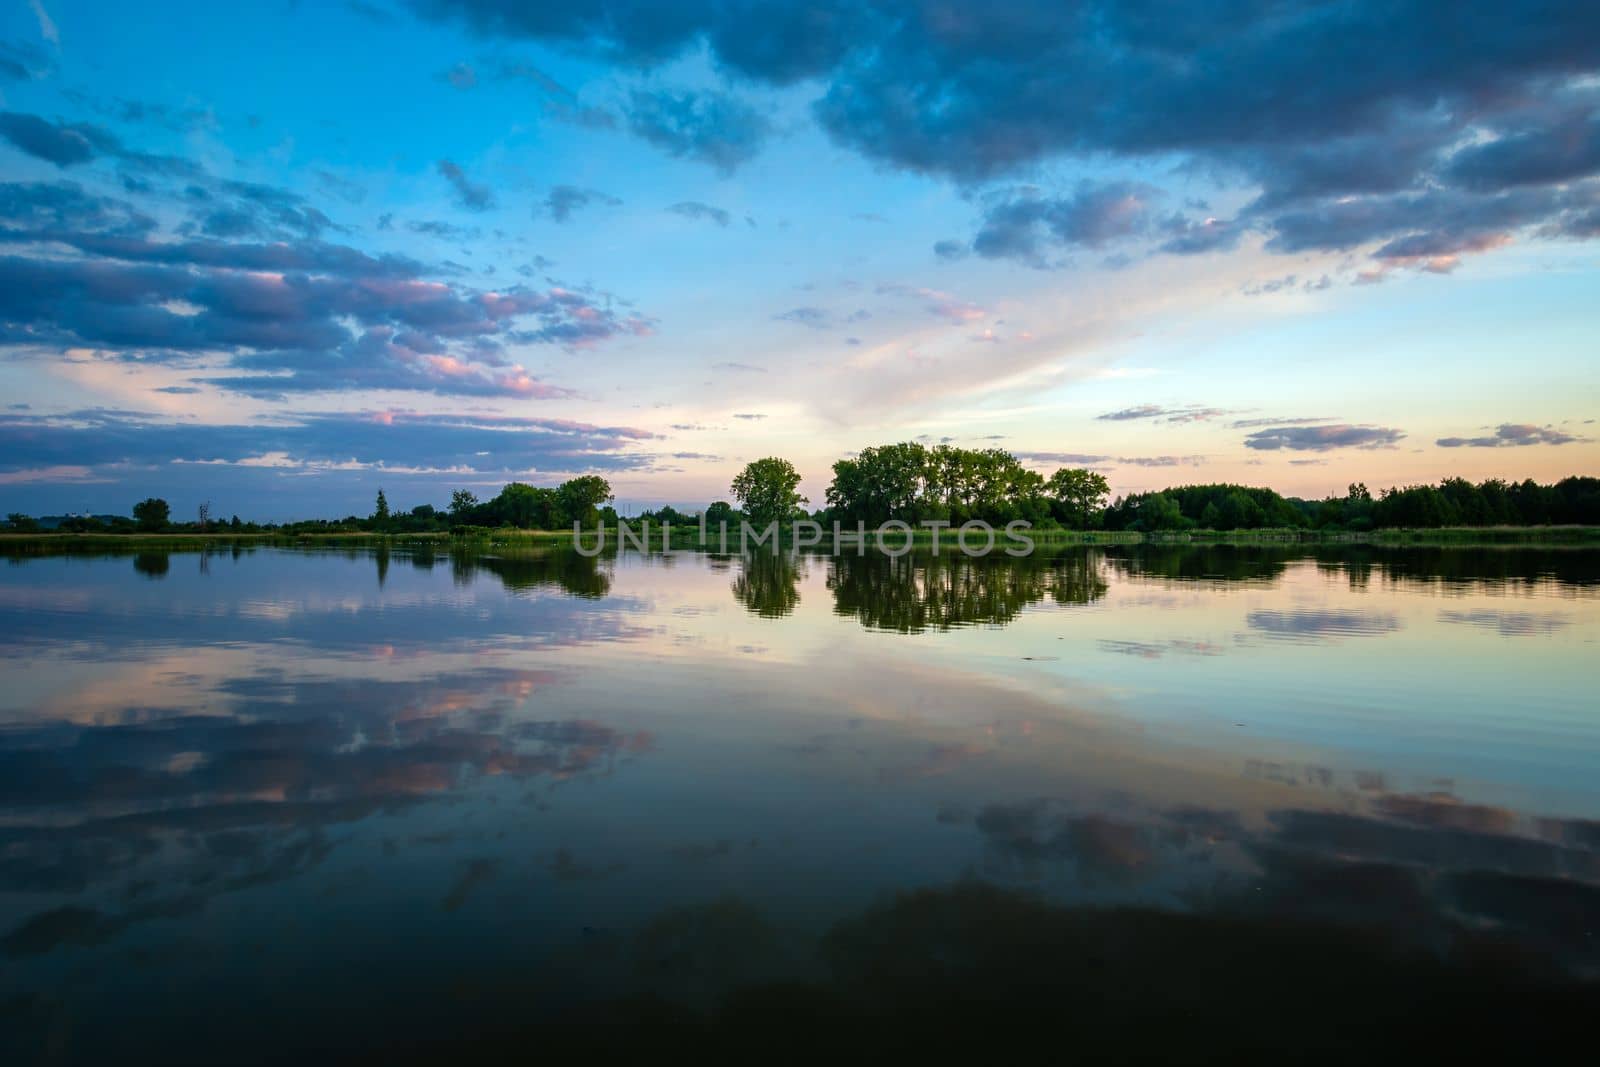 Reflection of evening clouds in the water of a calm lake, Stankow, Poland by darekb22